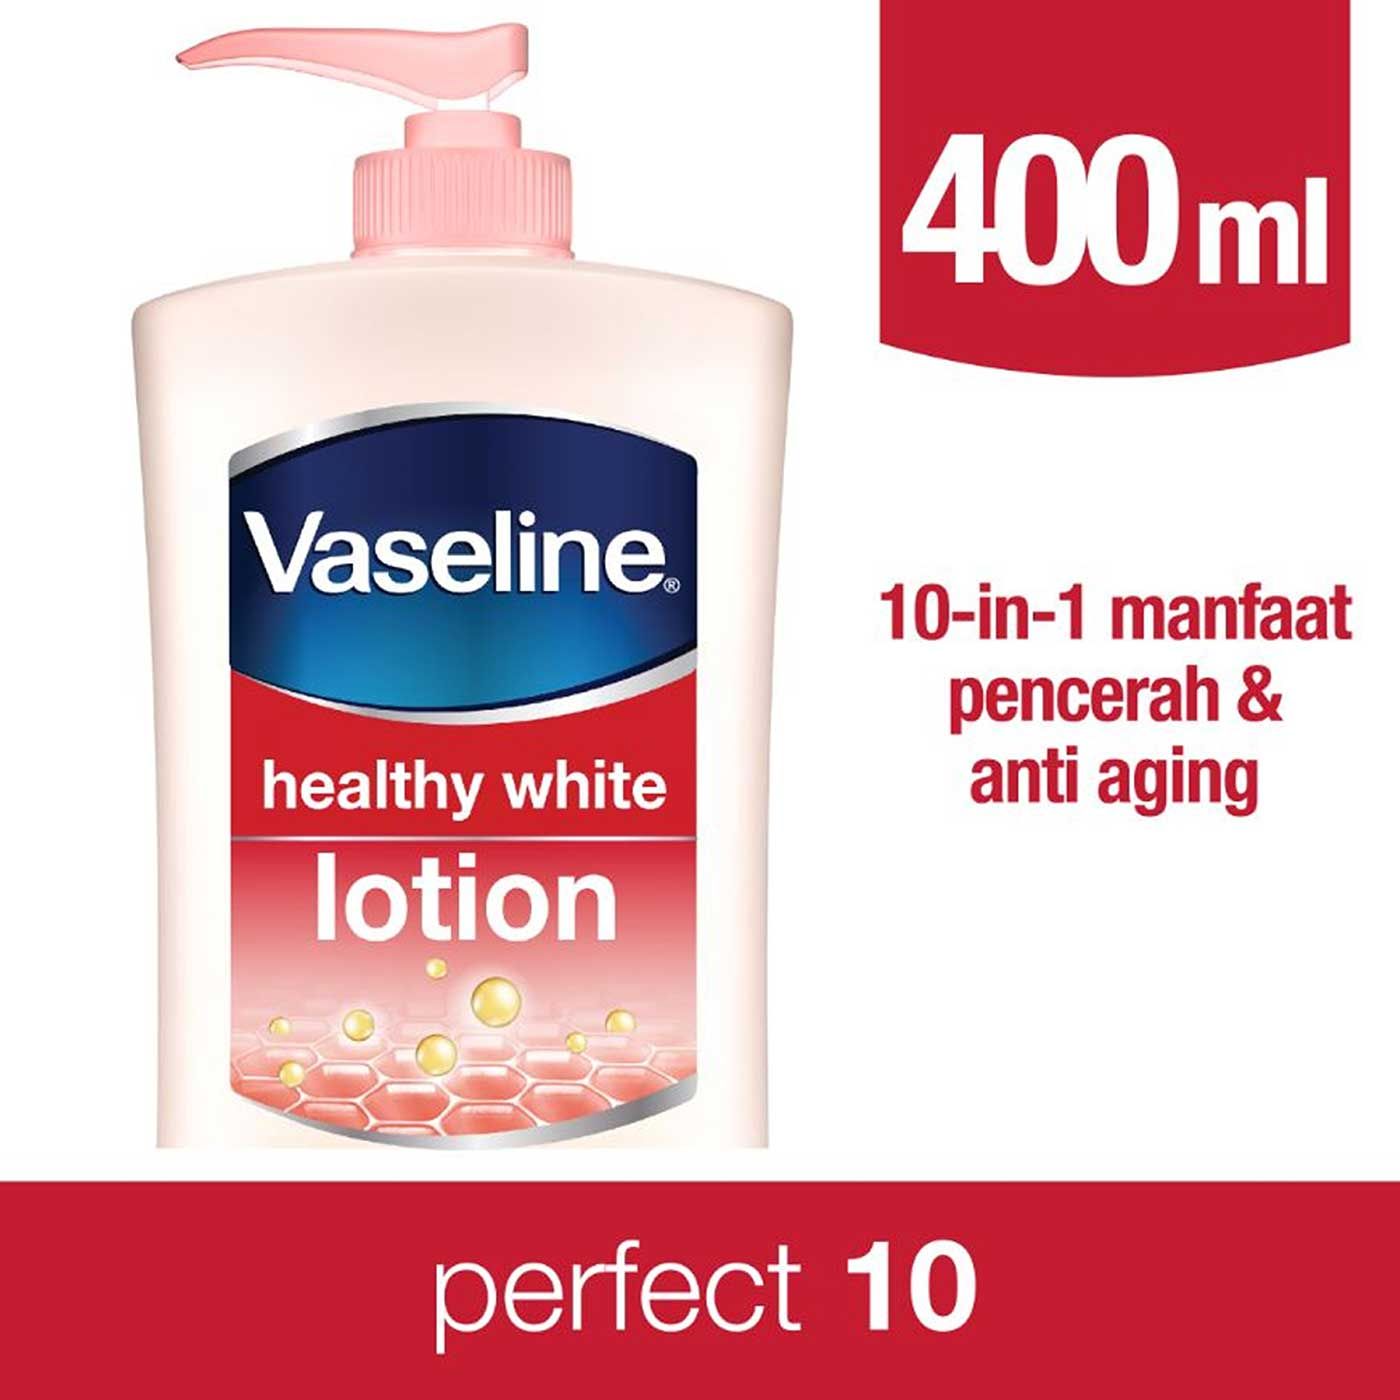 Vaseline Lotion Healthy White Perfect 10 400ml - 2